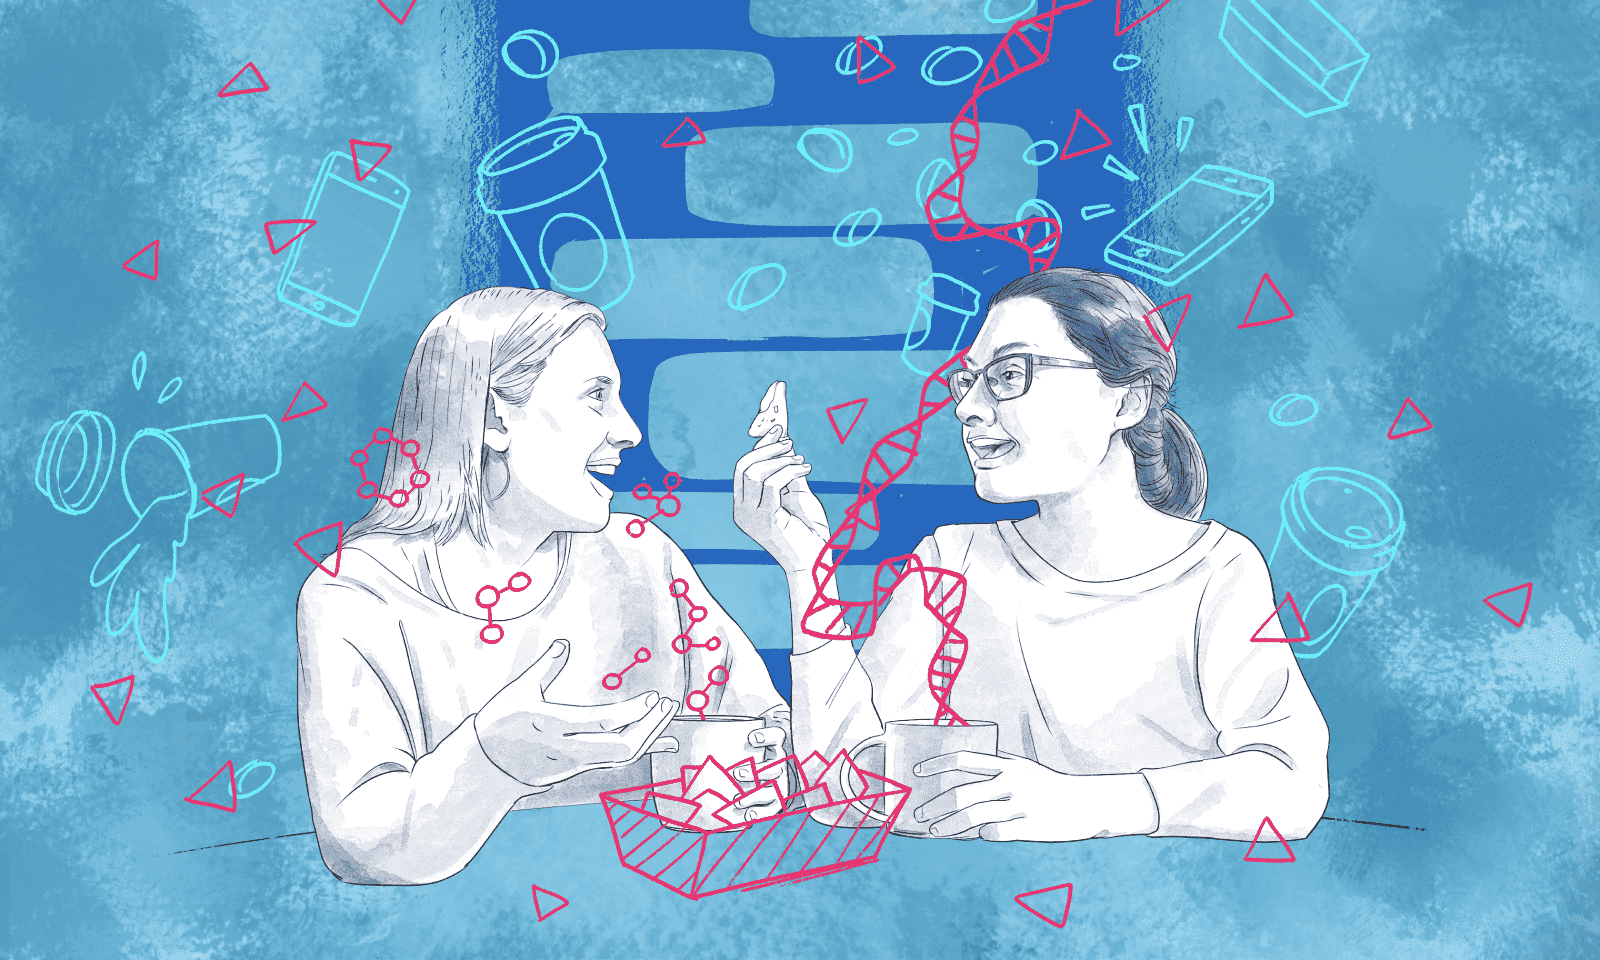 Illustration of two women sitting together and talking while drinking from mugs and eating nachos.